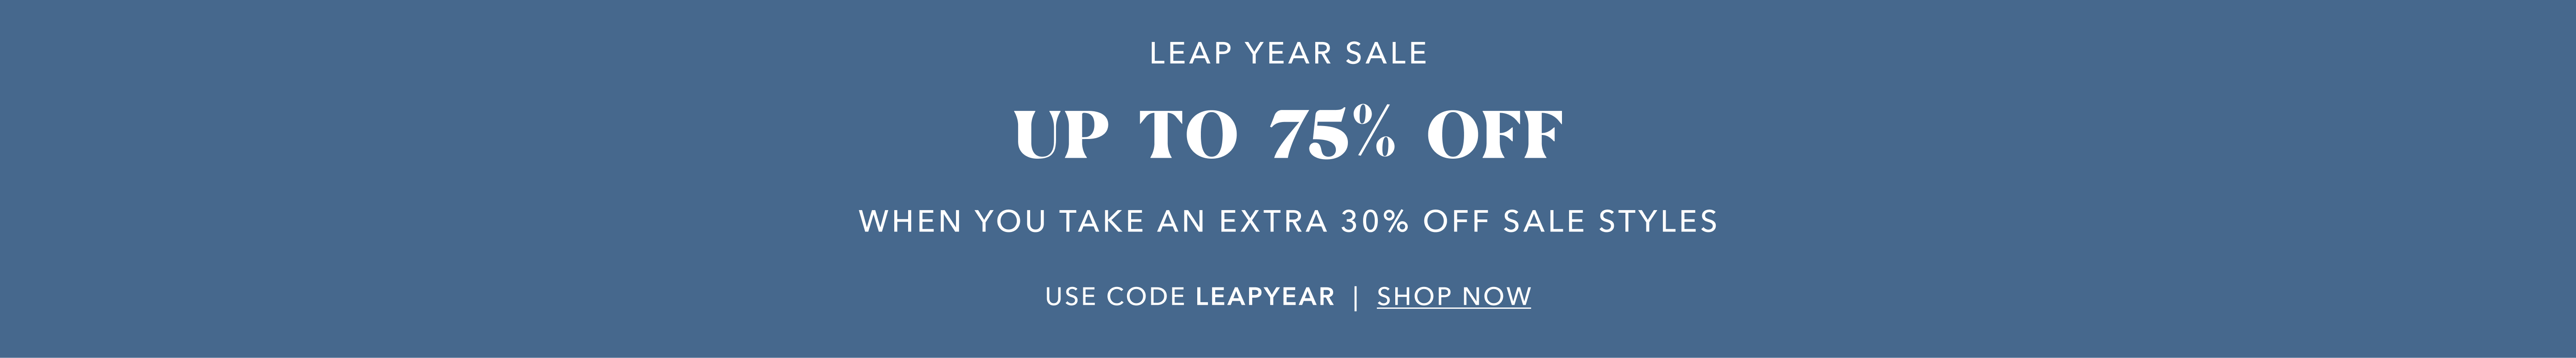 Leap Year Sale Up to 75% OFF When you take an extra 30% off Sale Styles Use Code LEAPYEAR